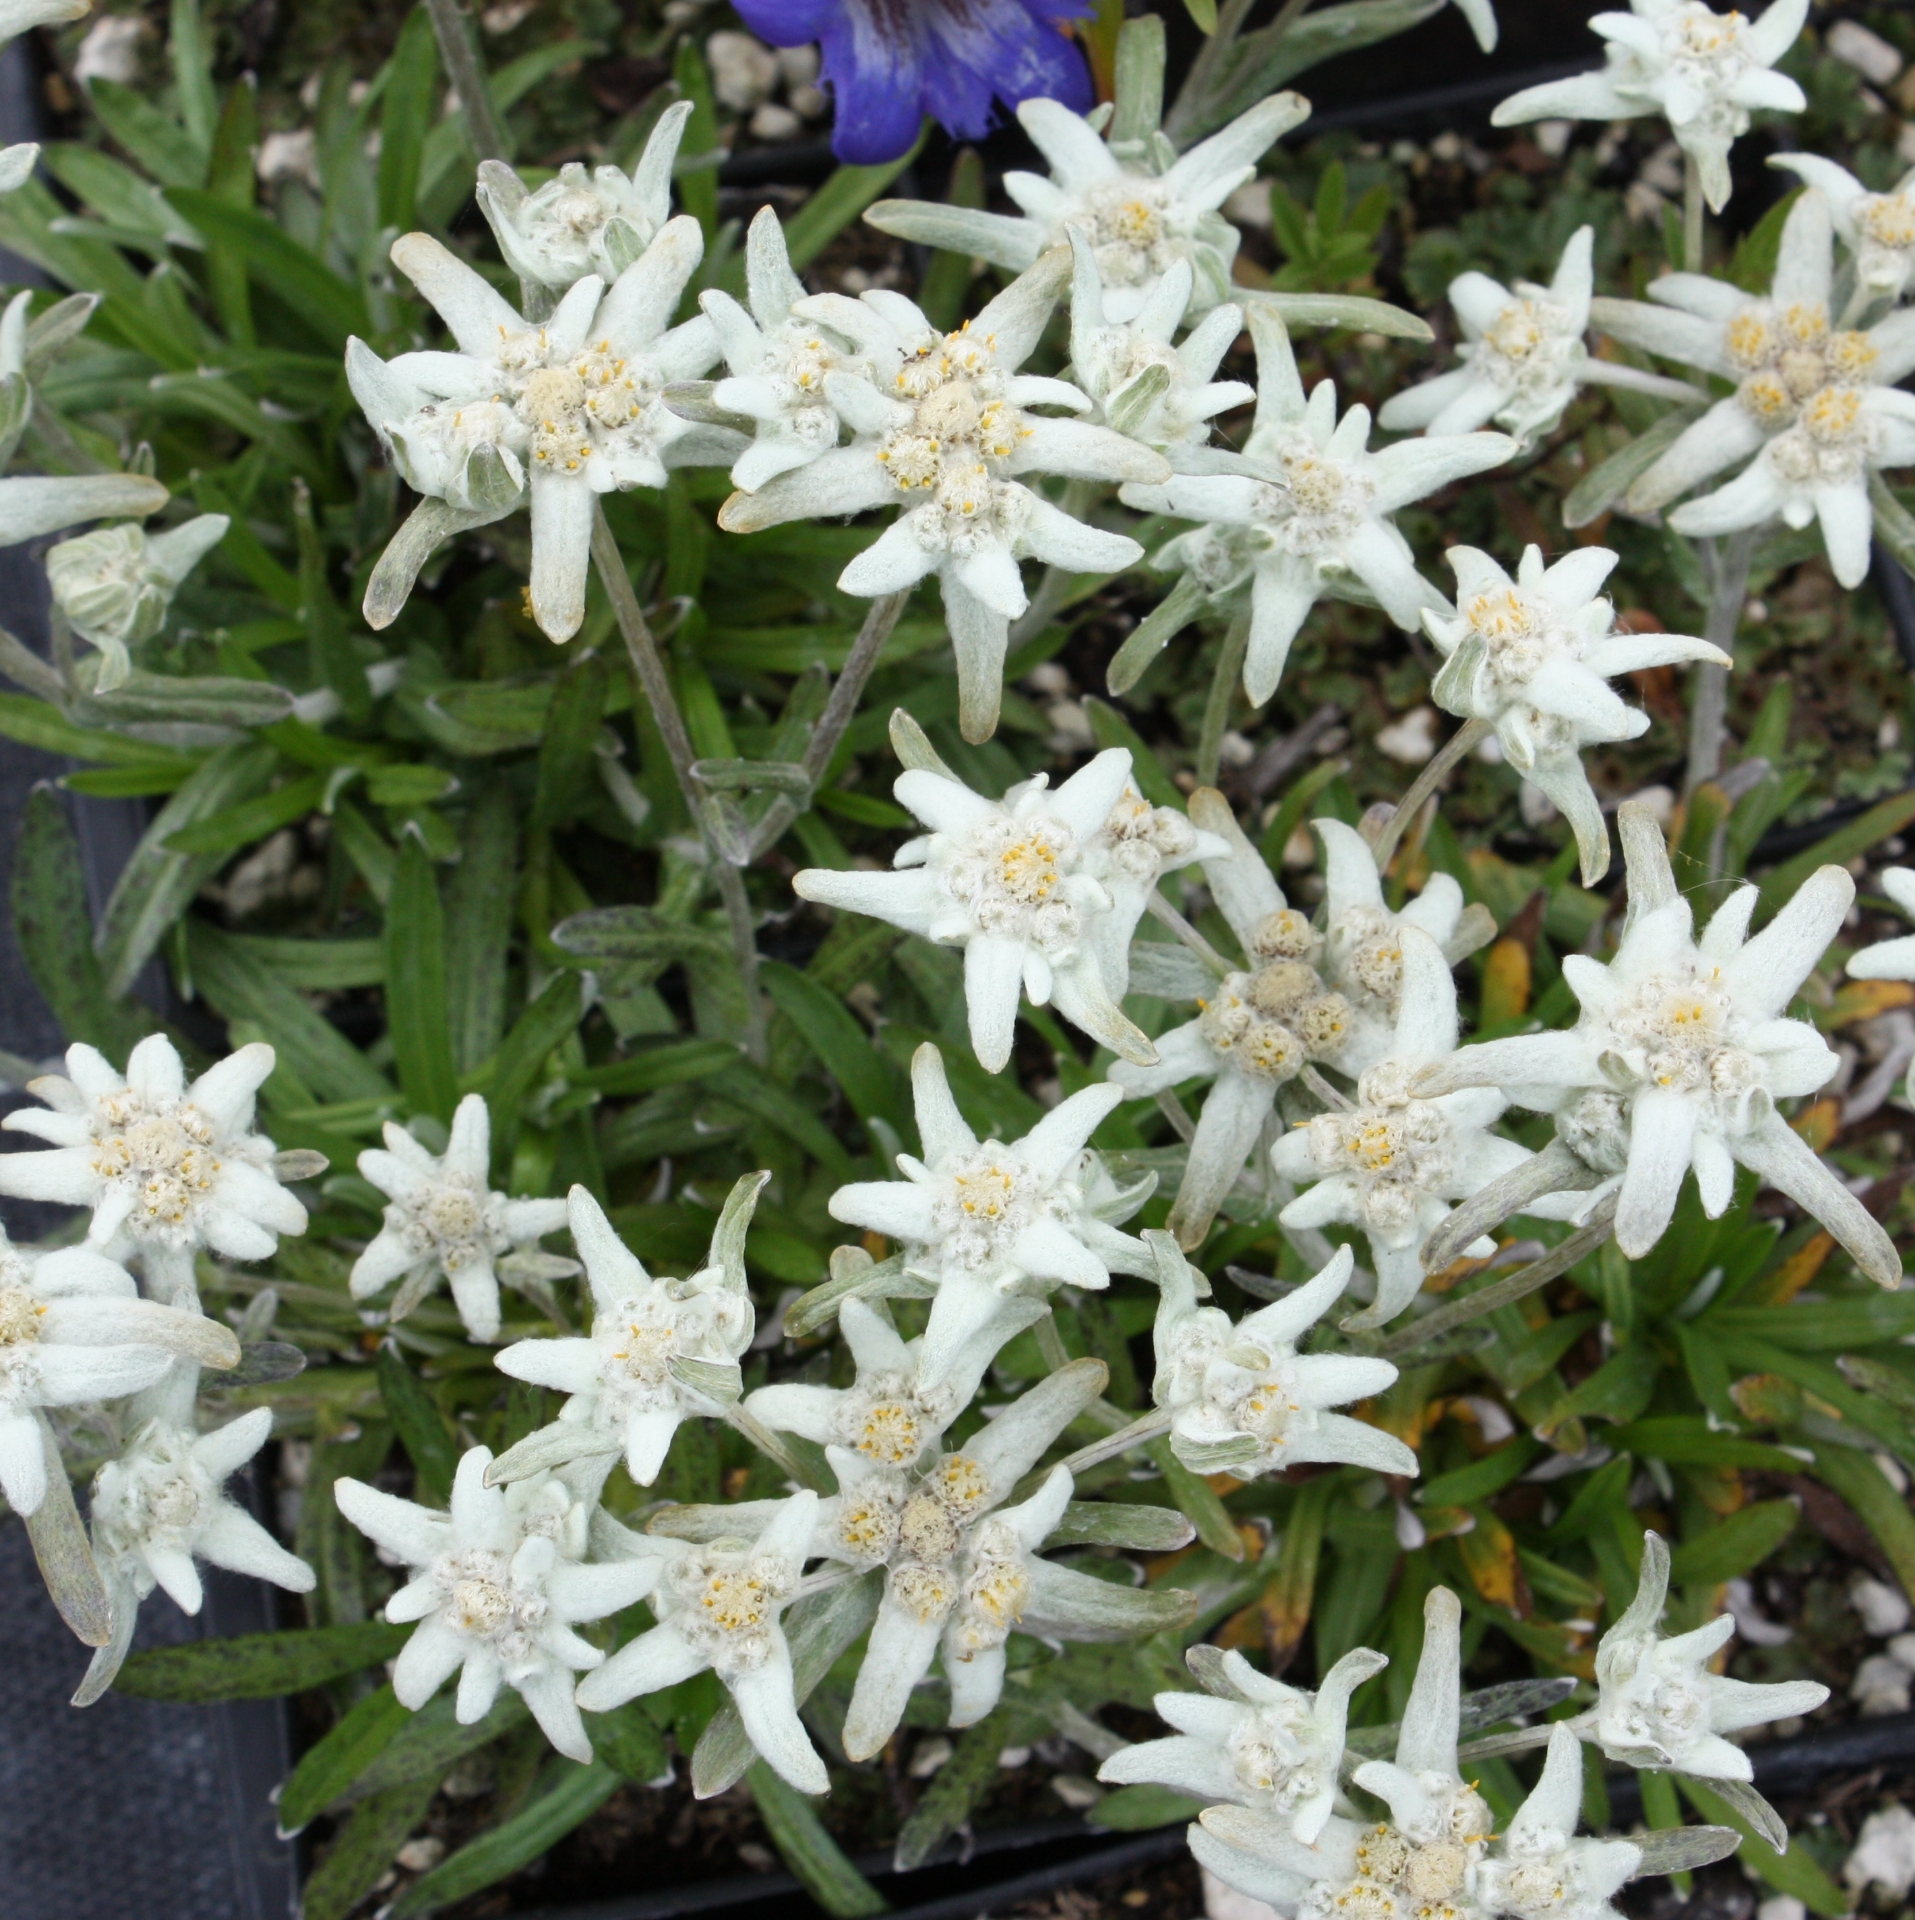 Edelweiss Perennials. Another Asian species found in the Pamir Mts